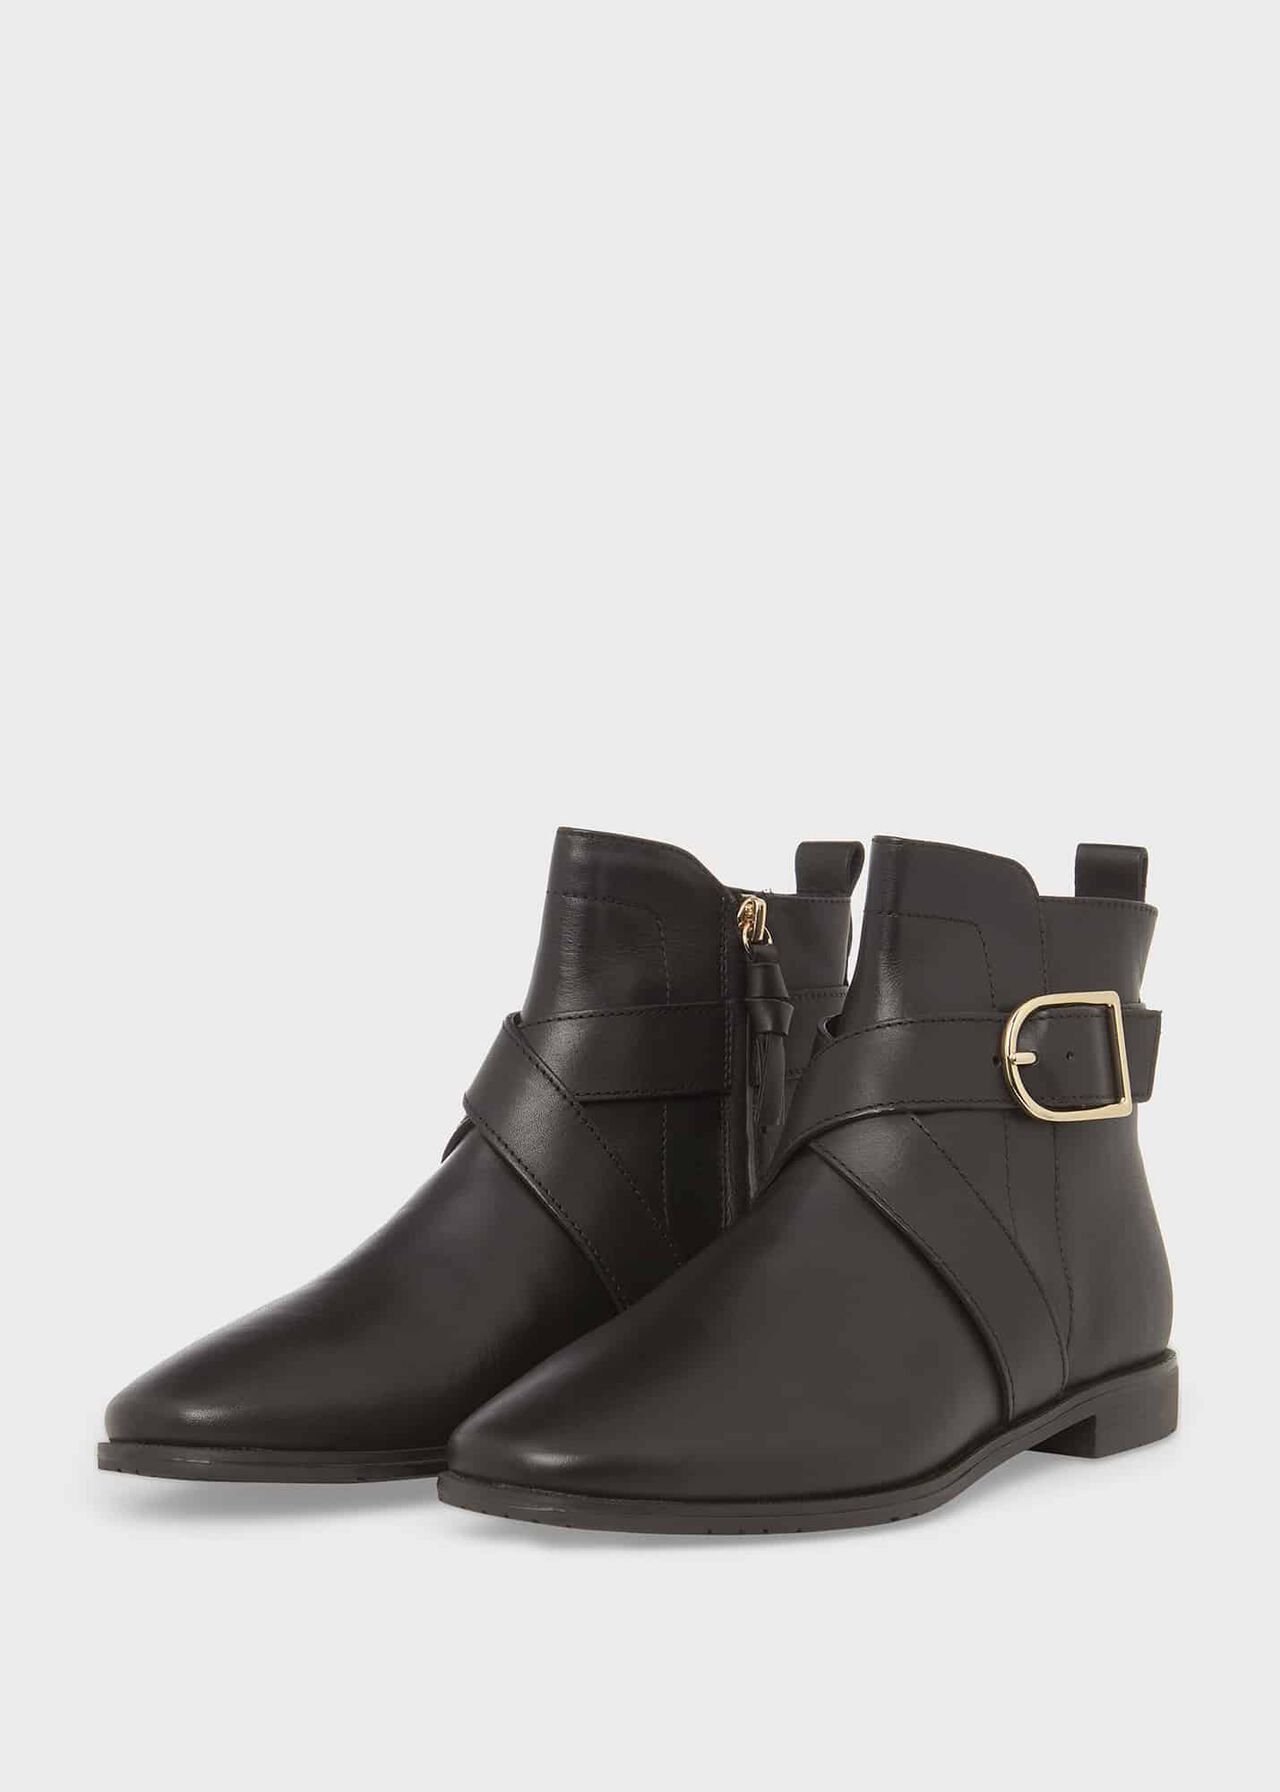 Ruthie Leather Ankle Boots, Black, hi-res